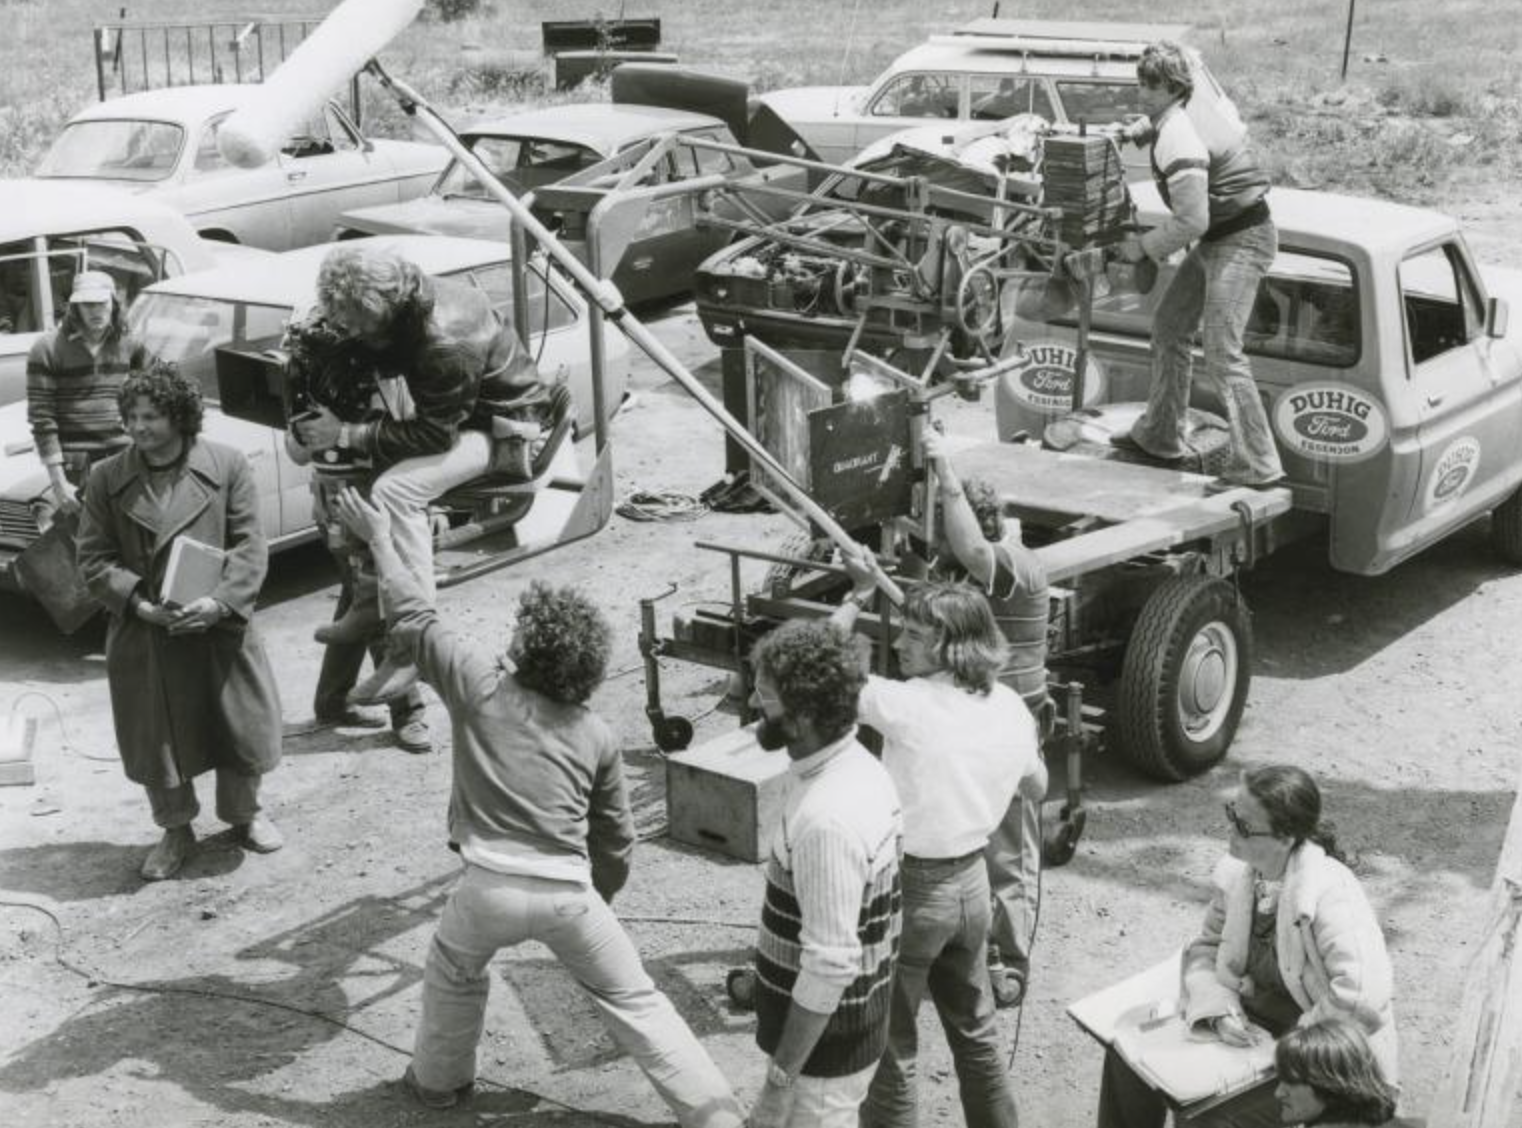 Behind the scenes of "Mad Max", circa 1979